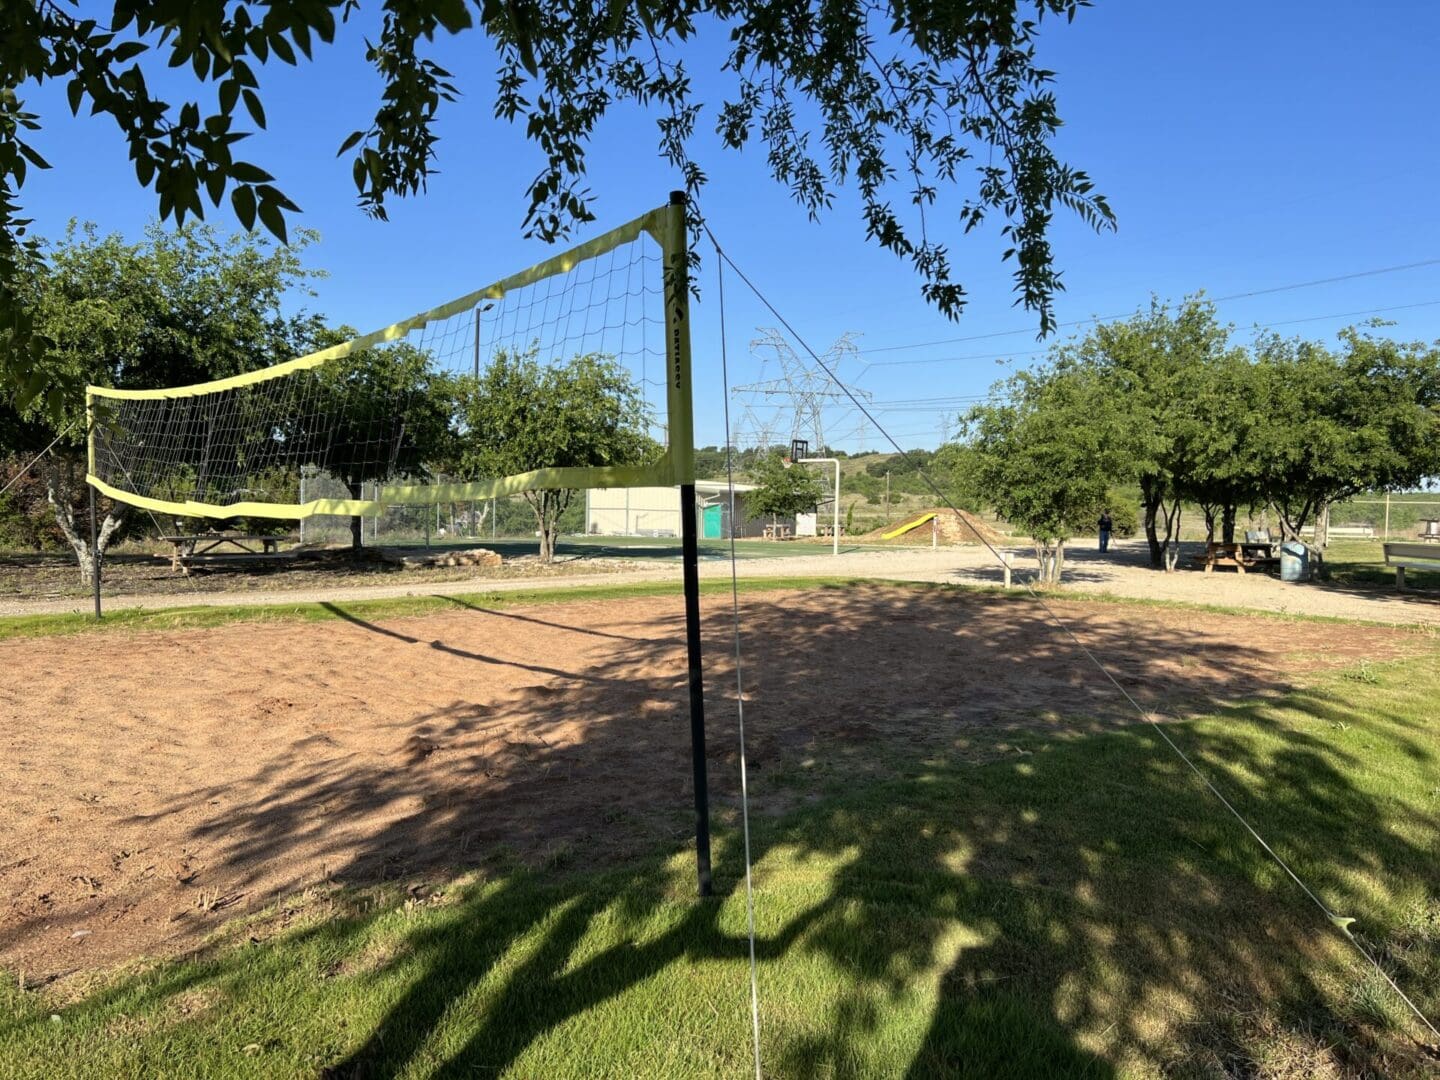 A volleyball net in the middle of an empty field.